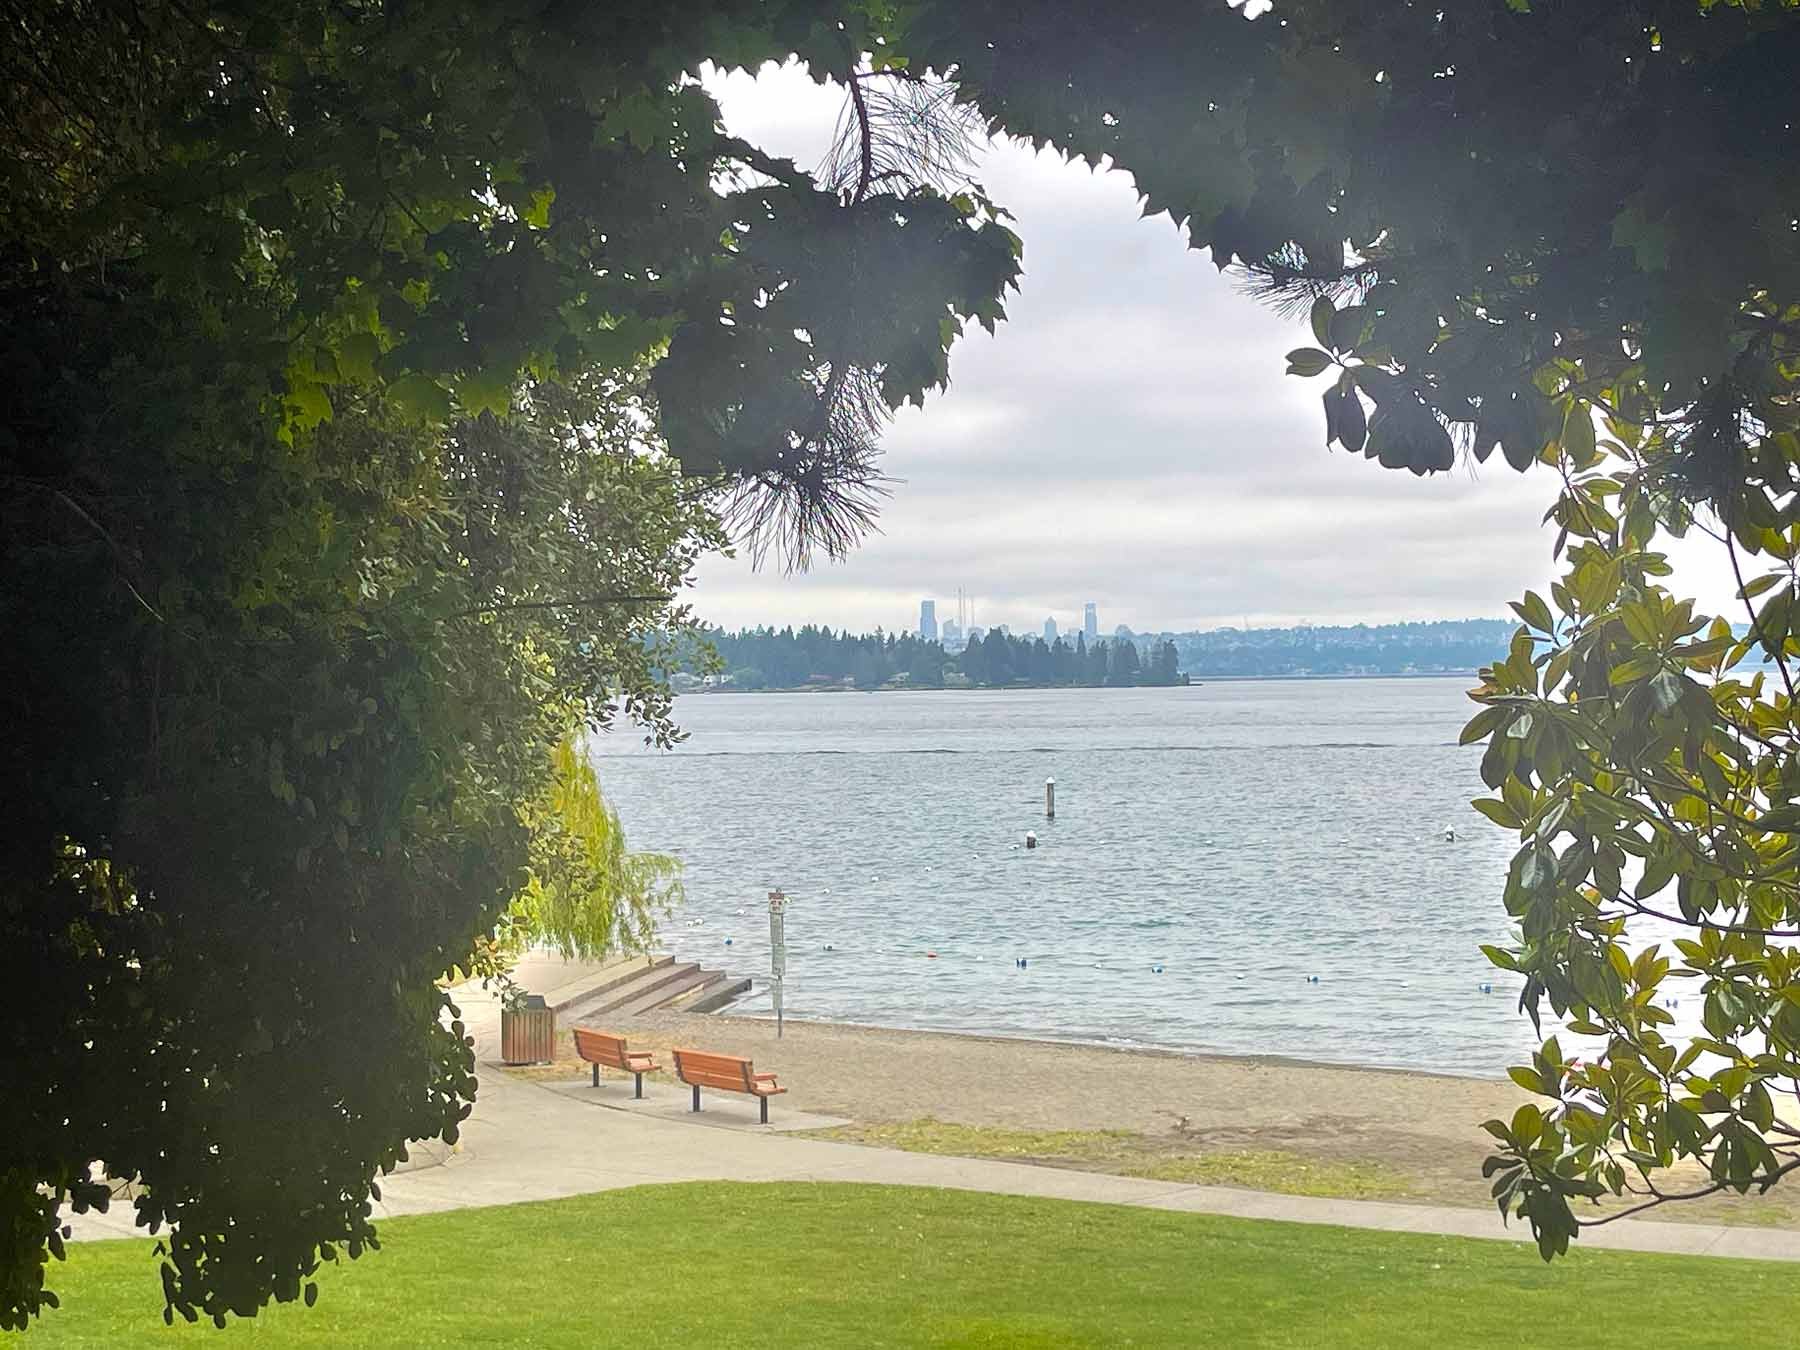 Houghton Beach Park in kirkland with lake washington, hunts point and Seattle skyline in the background